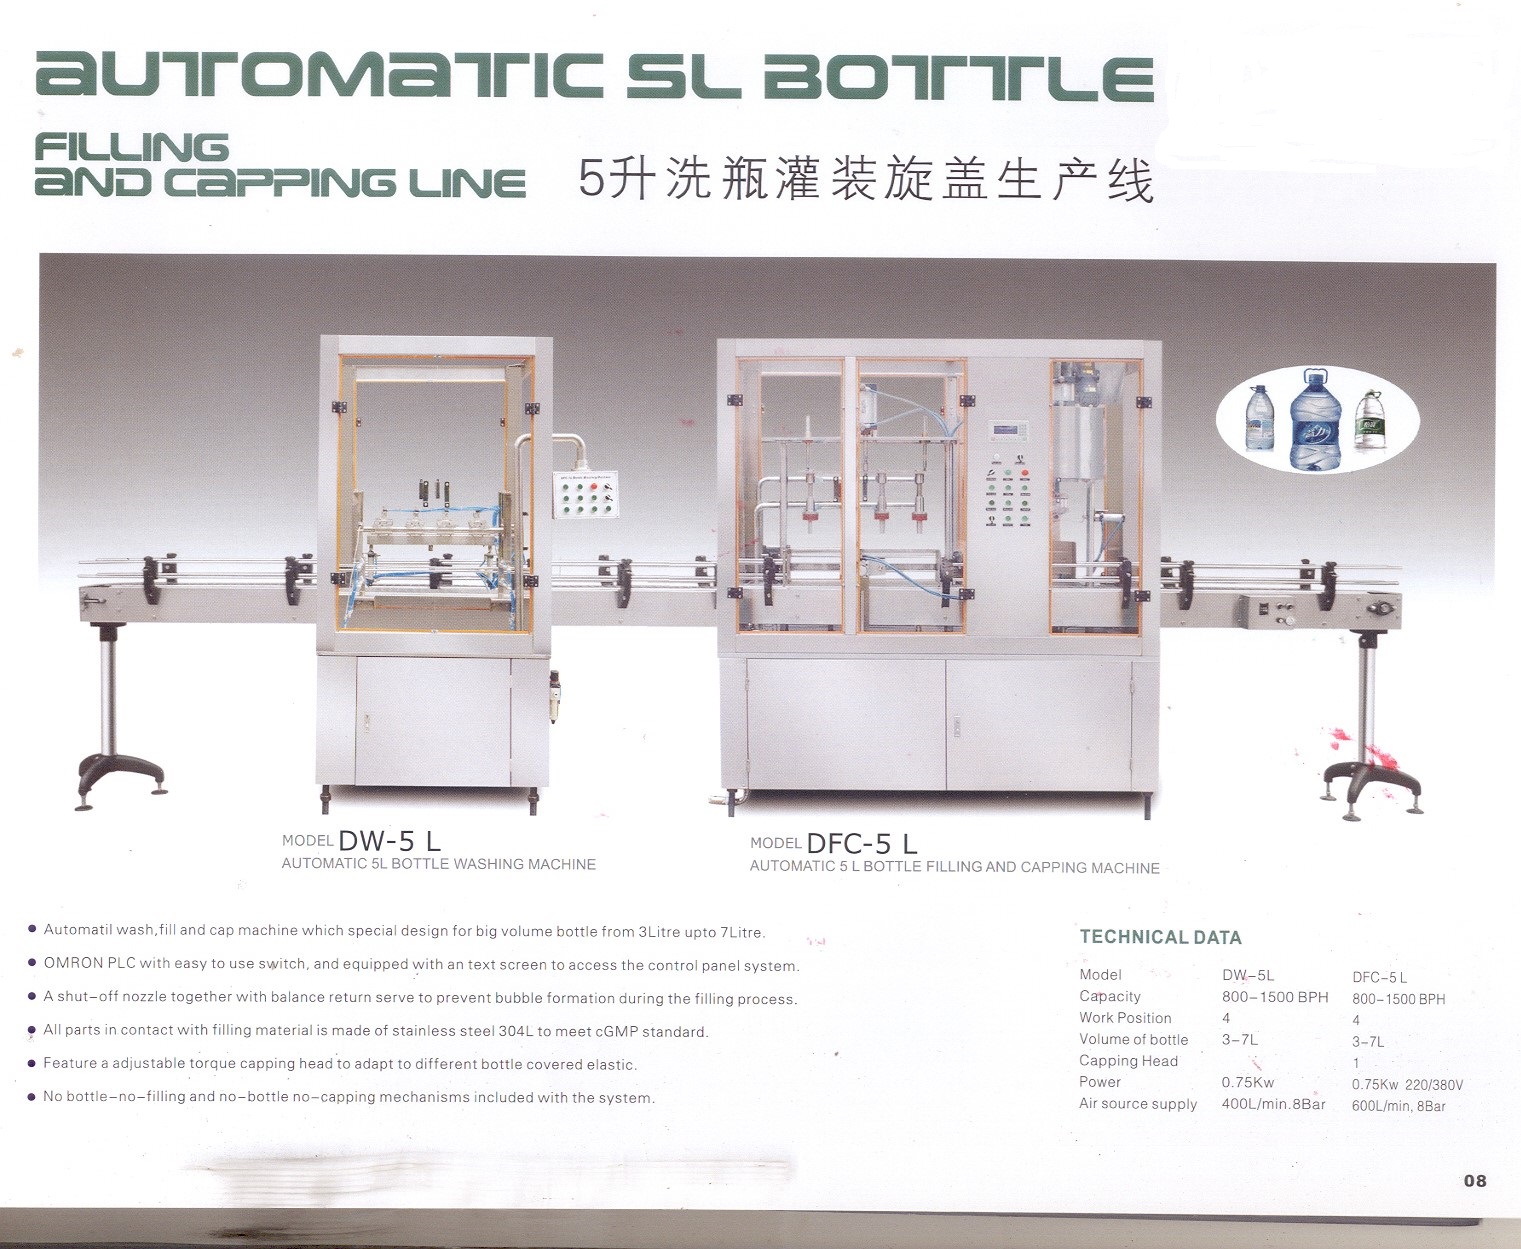 AUTOMATIC 5L BOTTLE FILLAND CAPPING LINE